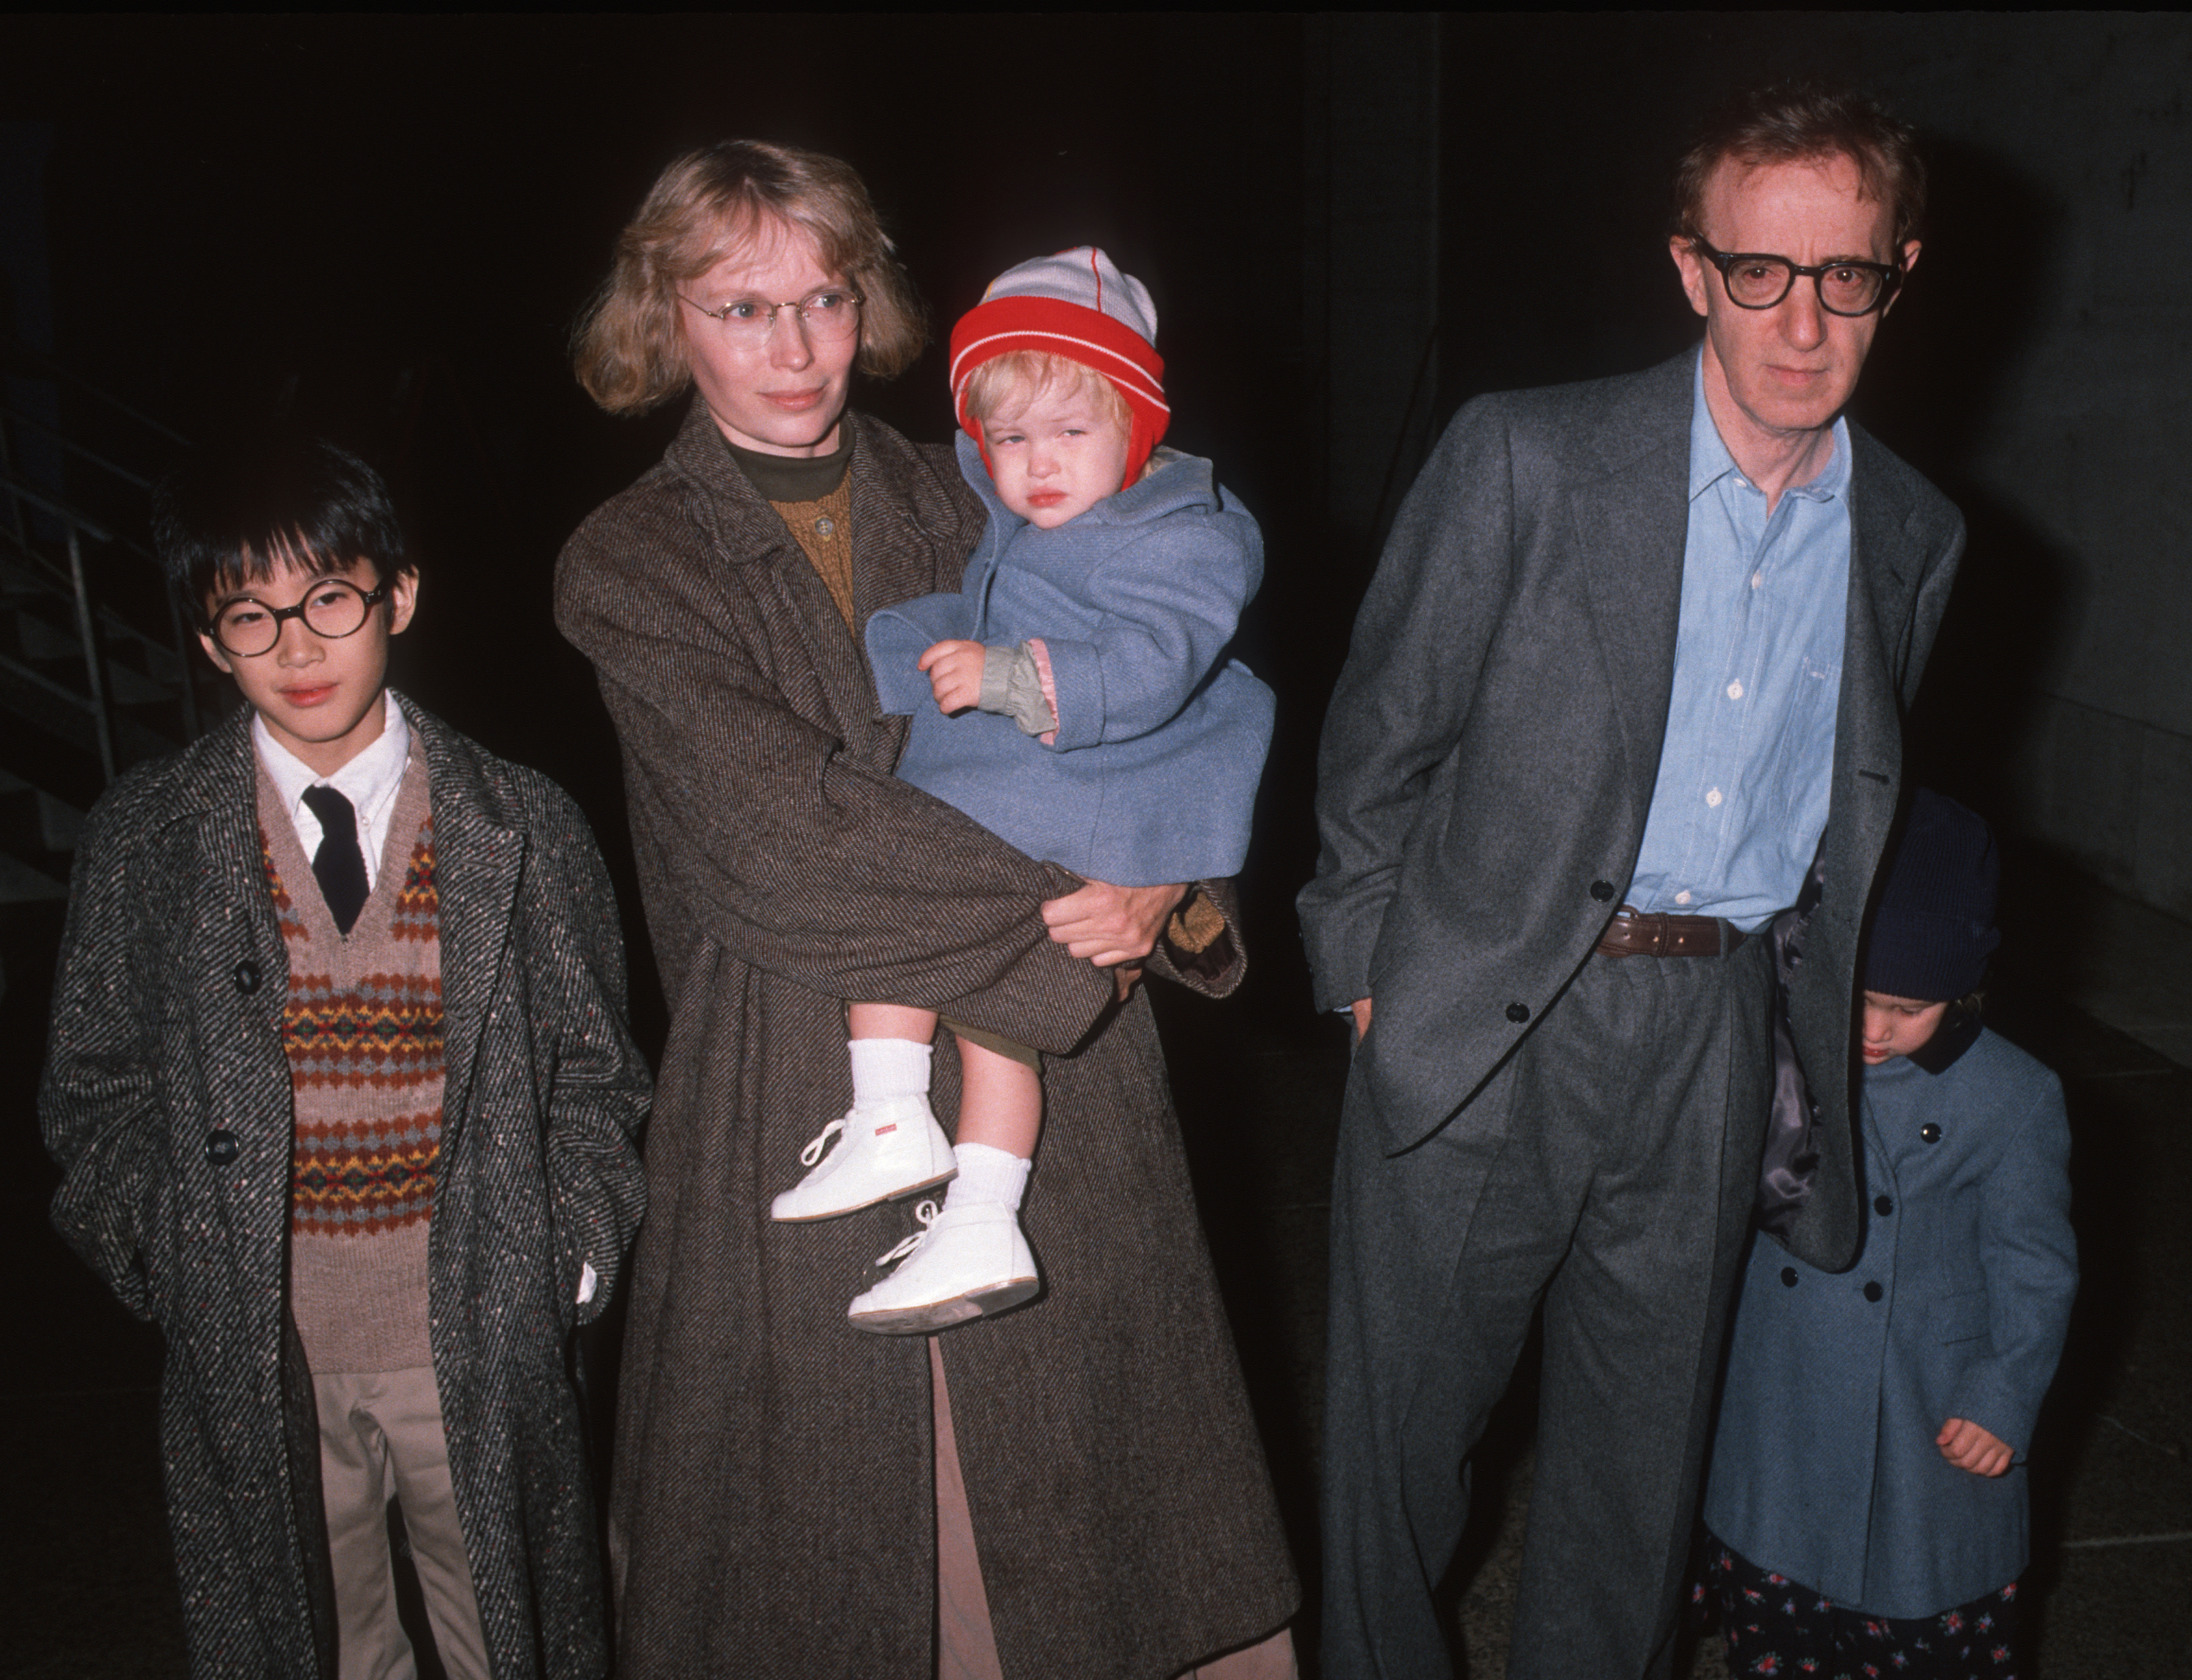 Woody Allen, Mia Farrow and their children at The Apple Circus Performance on November 3, 1989, in New York City. | Source: Getty Images